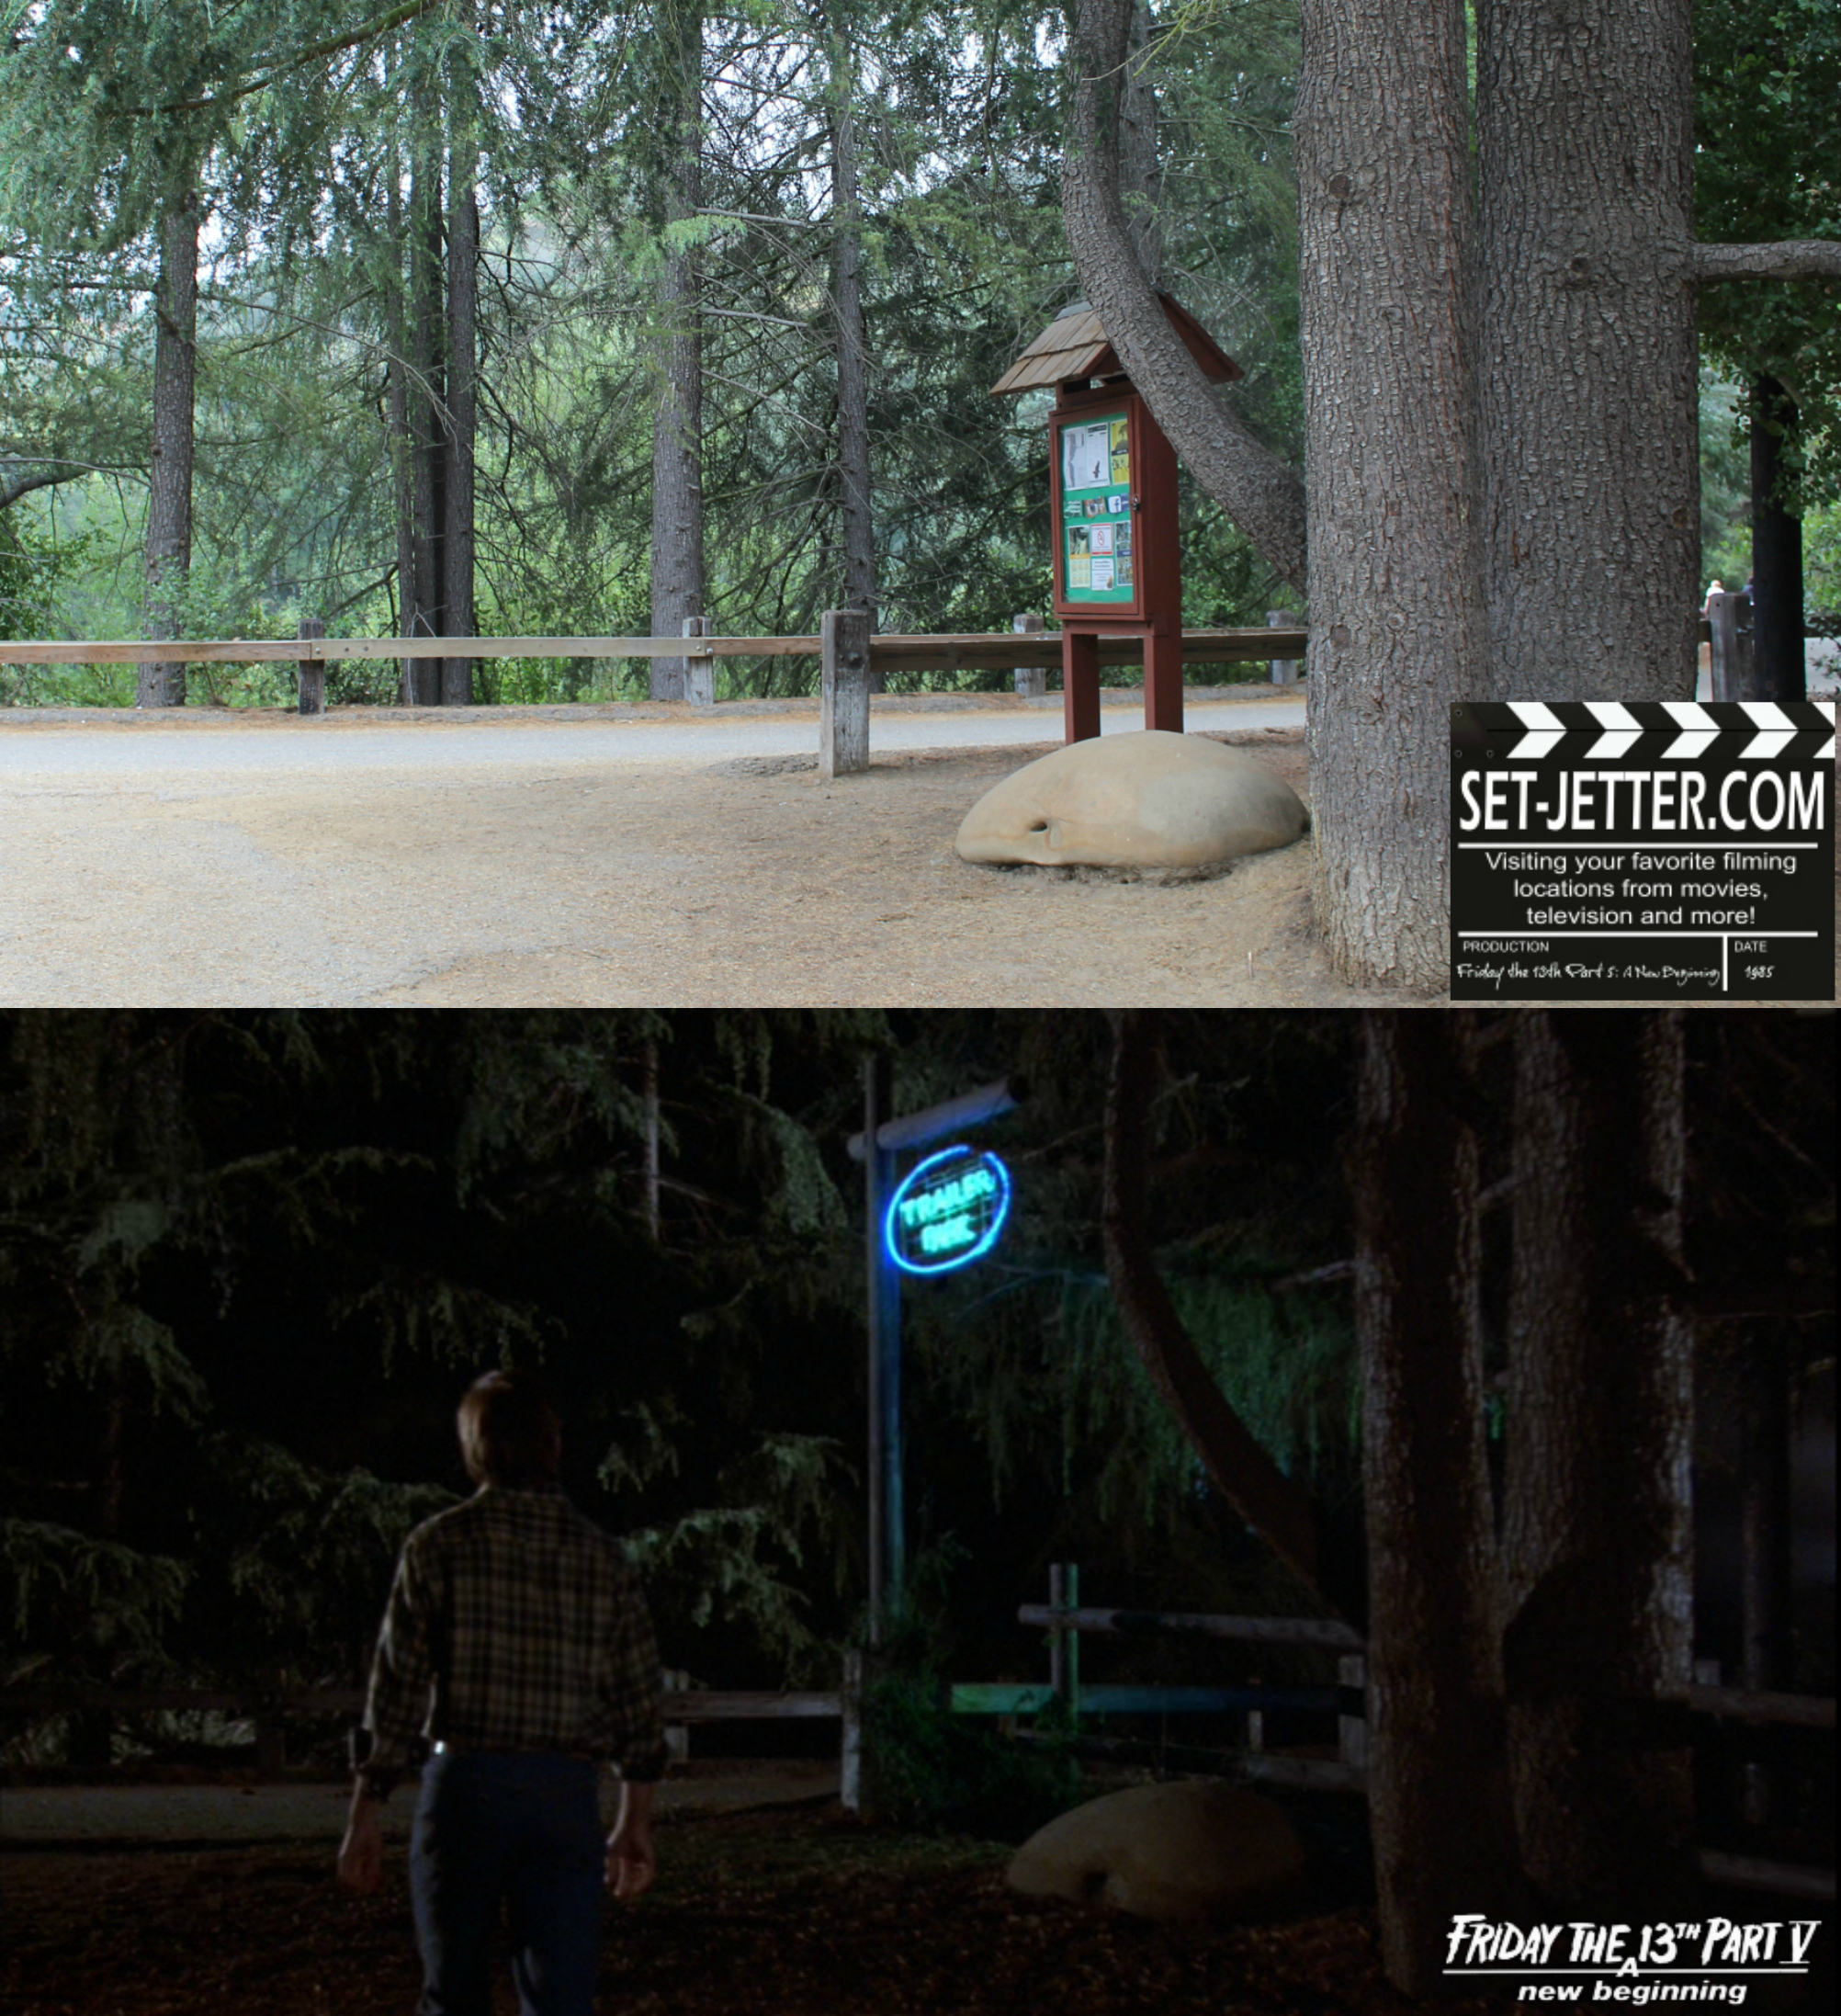 Friday the 13th Part V comparison 38.jpg